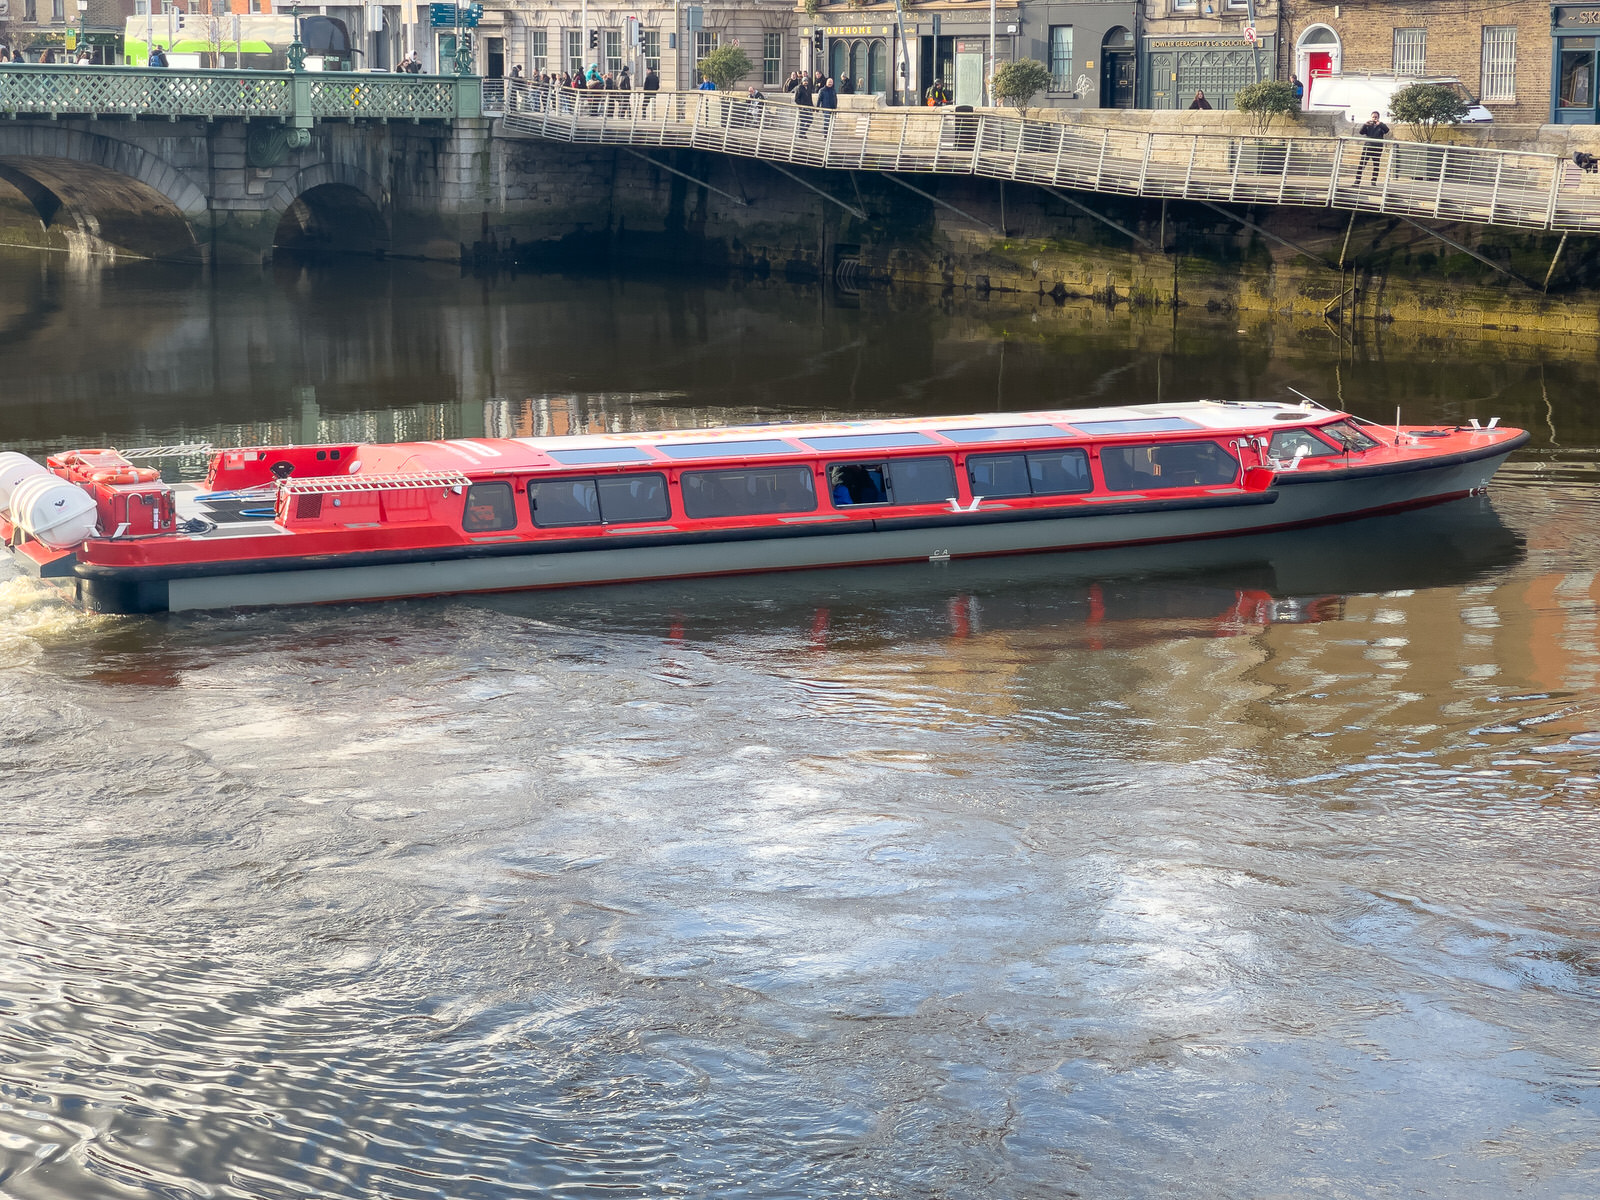 I HAD NOTHING BETTER TO DO [SO I PHOTOGRAPHED THE SPIRIT OF THE DOCKLANDS TURNING ON THE RIVER LIFFEY]-229458-1